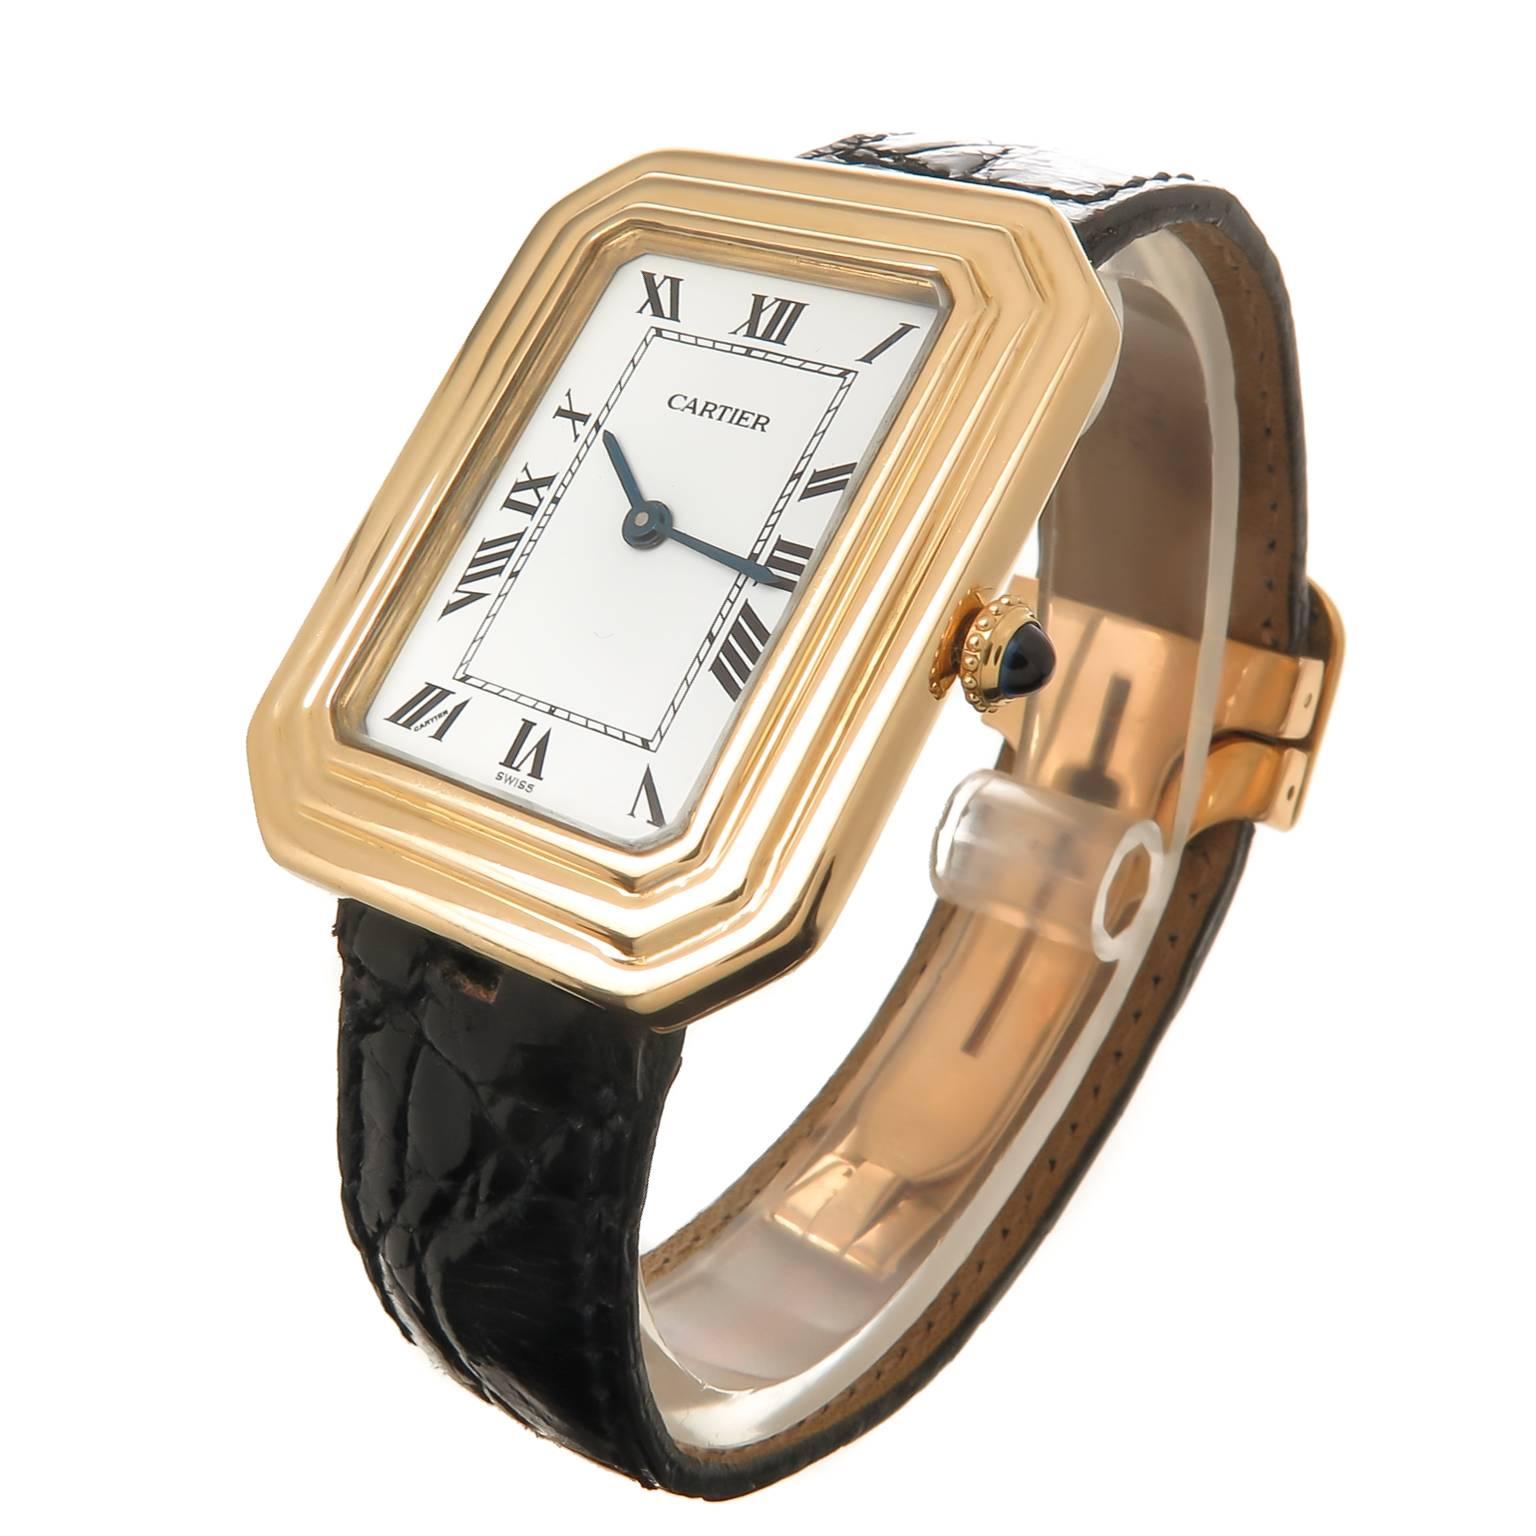 Circa 1970s Cartier Cristallor 18K Yellow Gold Wrist watch, 34 X 27 MM 2 piece water resistant stepped case. This is the Large Model of the Cristallor collection. 17 Jewel Manual wind Cartier movement. White Dial with Black Roman Numerals and a